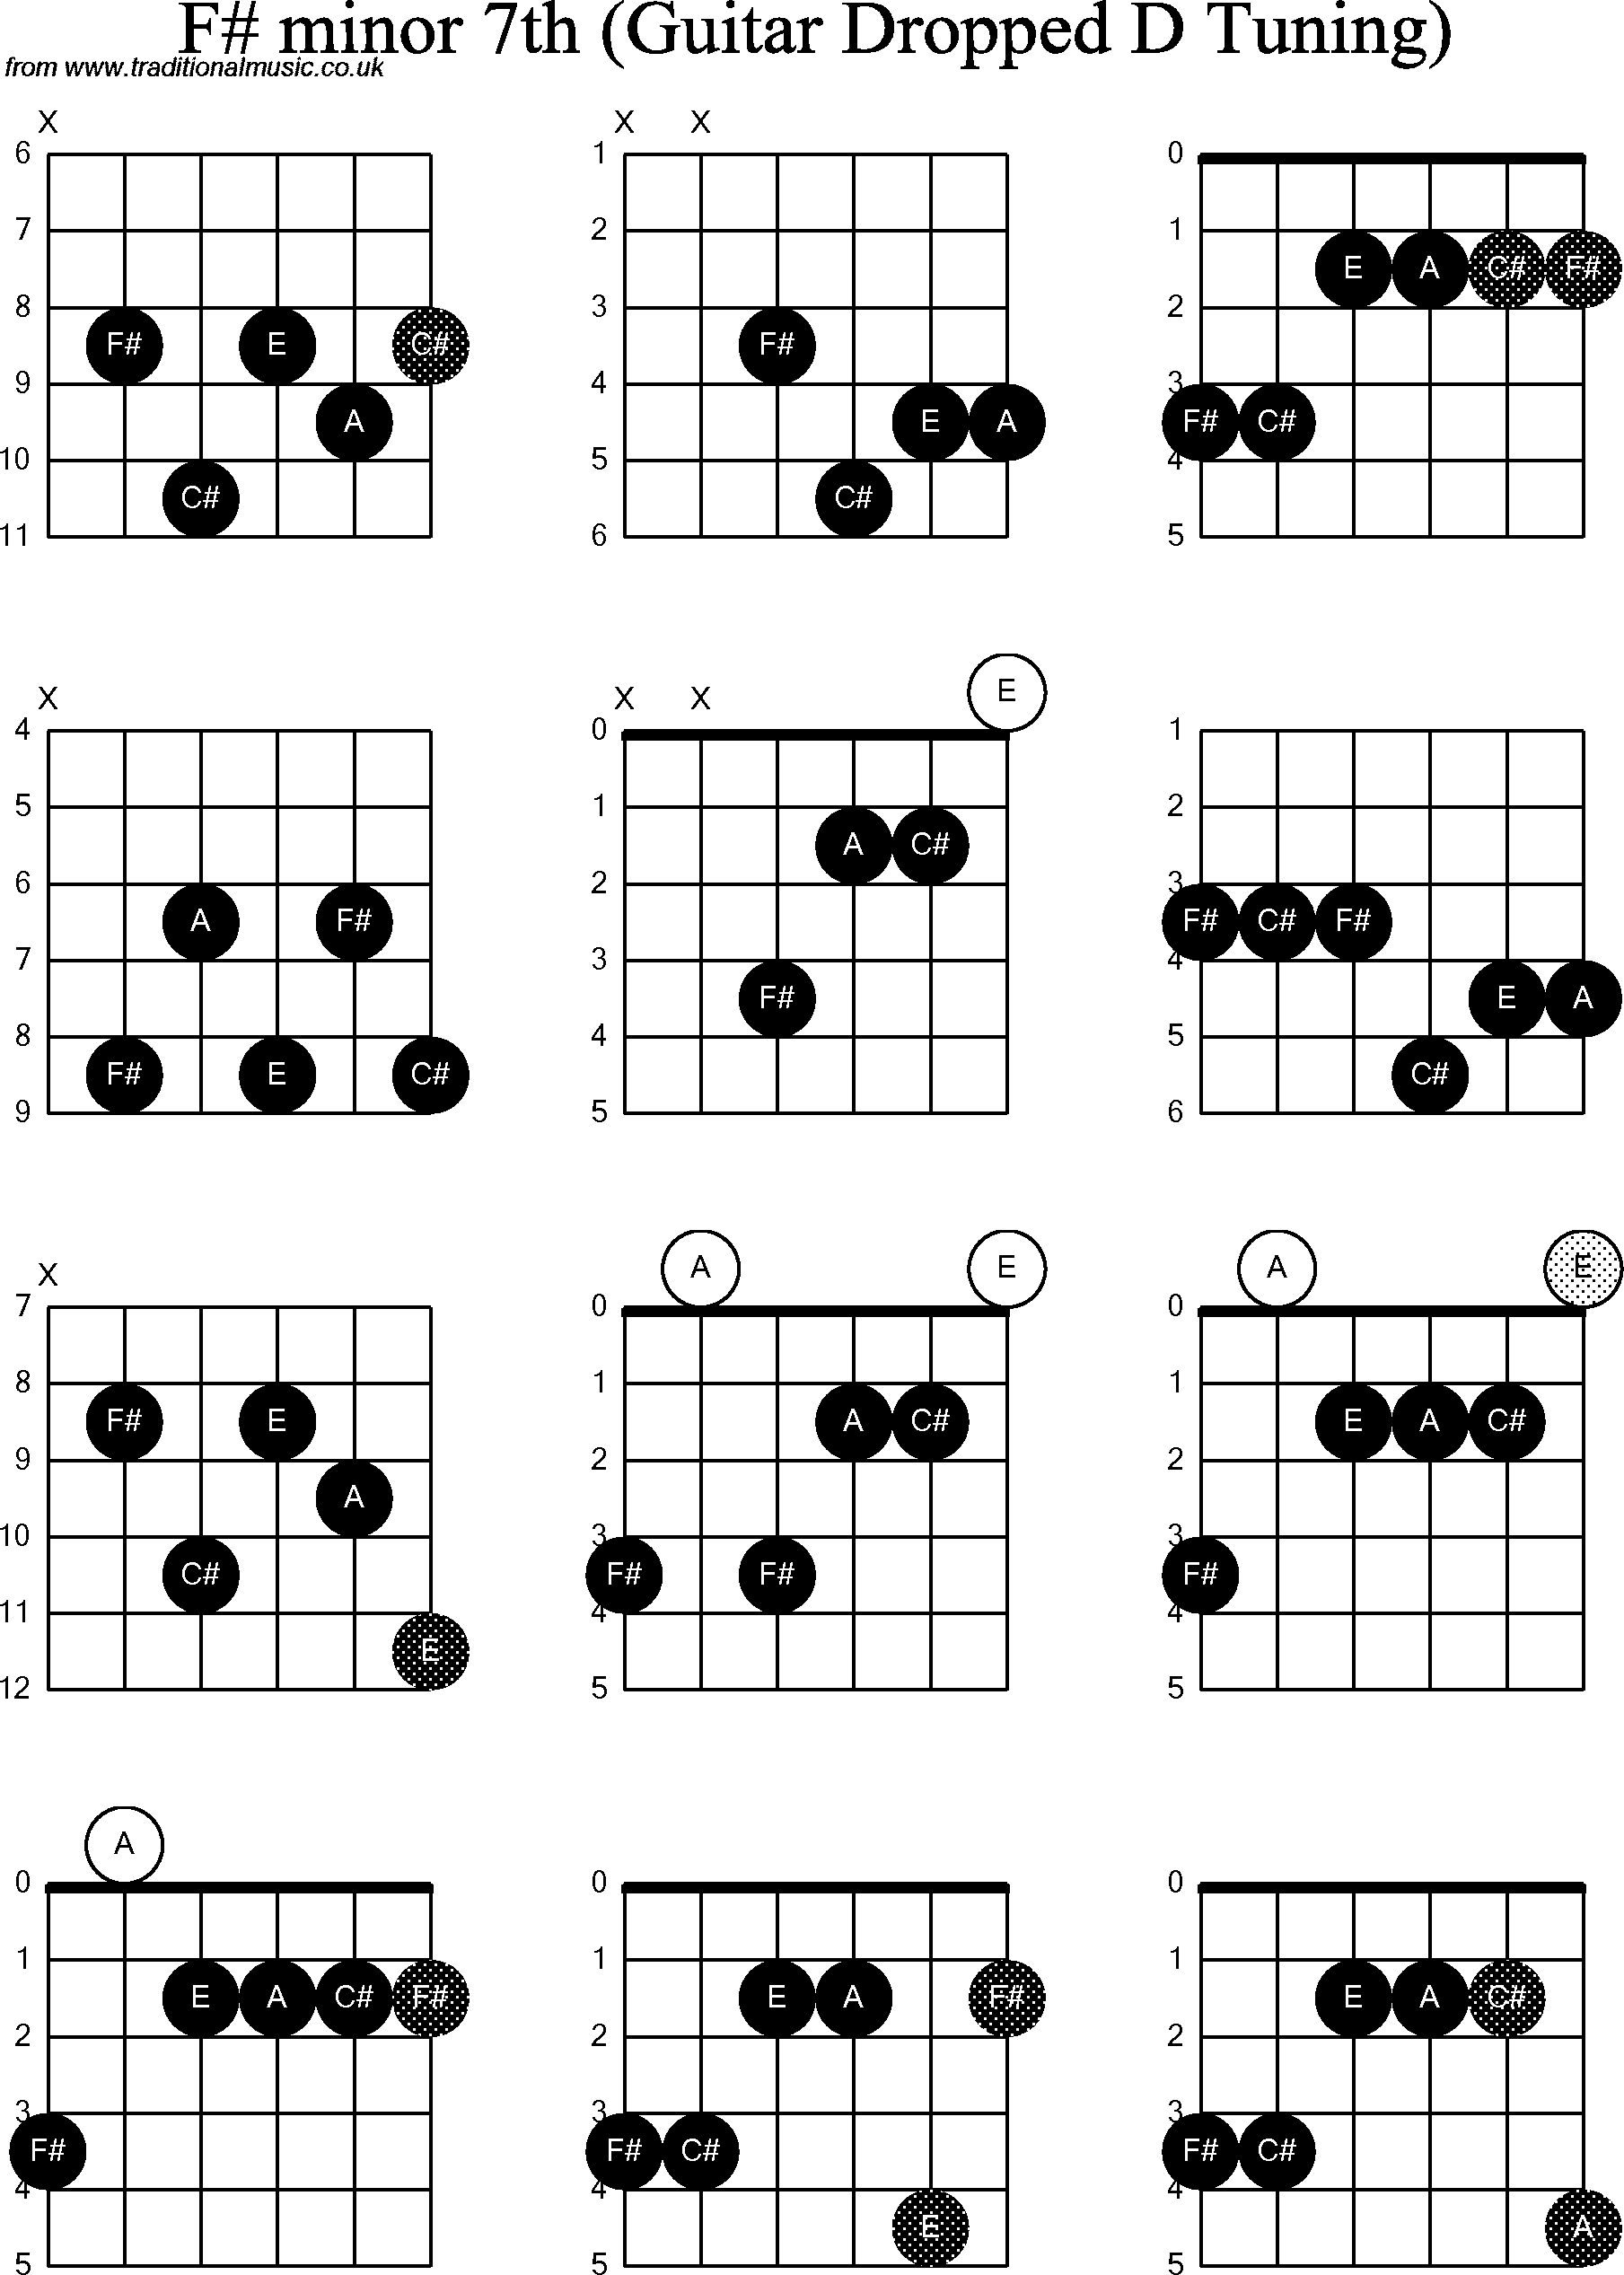 Chord diagrams for dropped D Guitar(DADGBE), F Sharp Minor7th